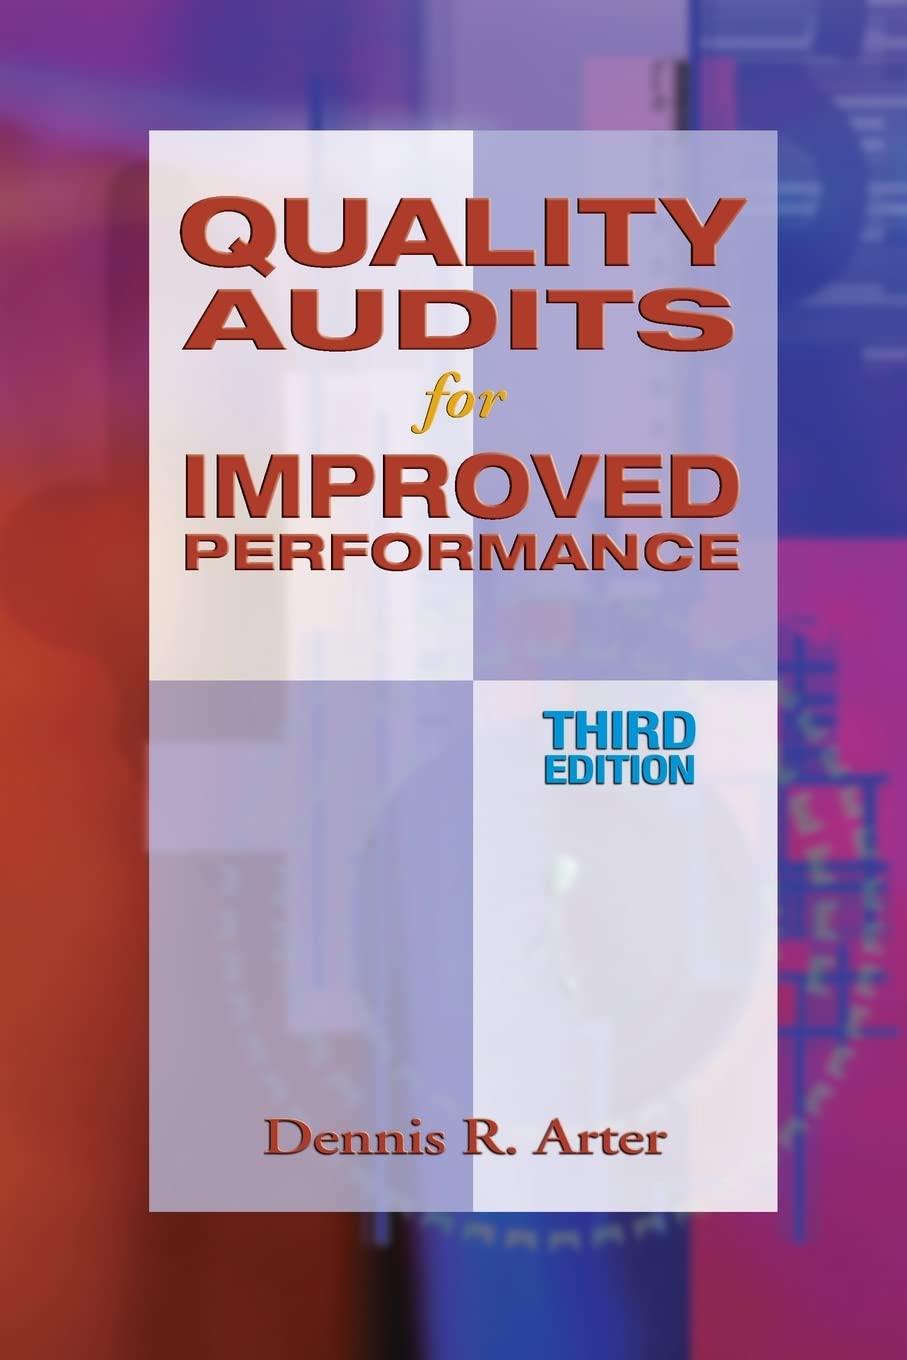 quality audits for improved performance 3rd edition dennis r. arter 0873895703, 978-0873895705